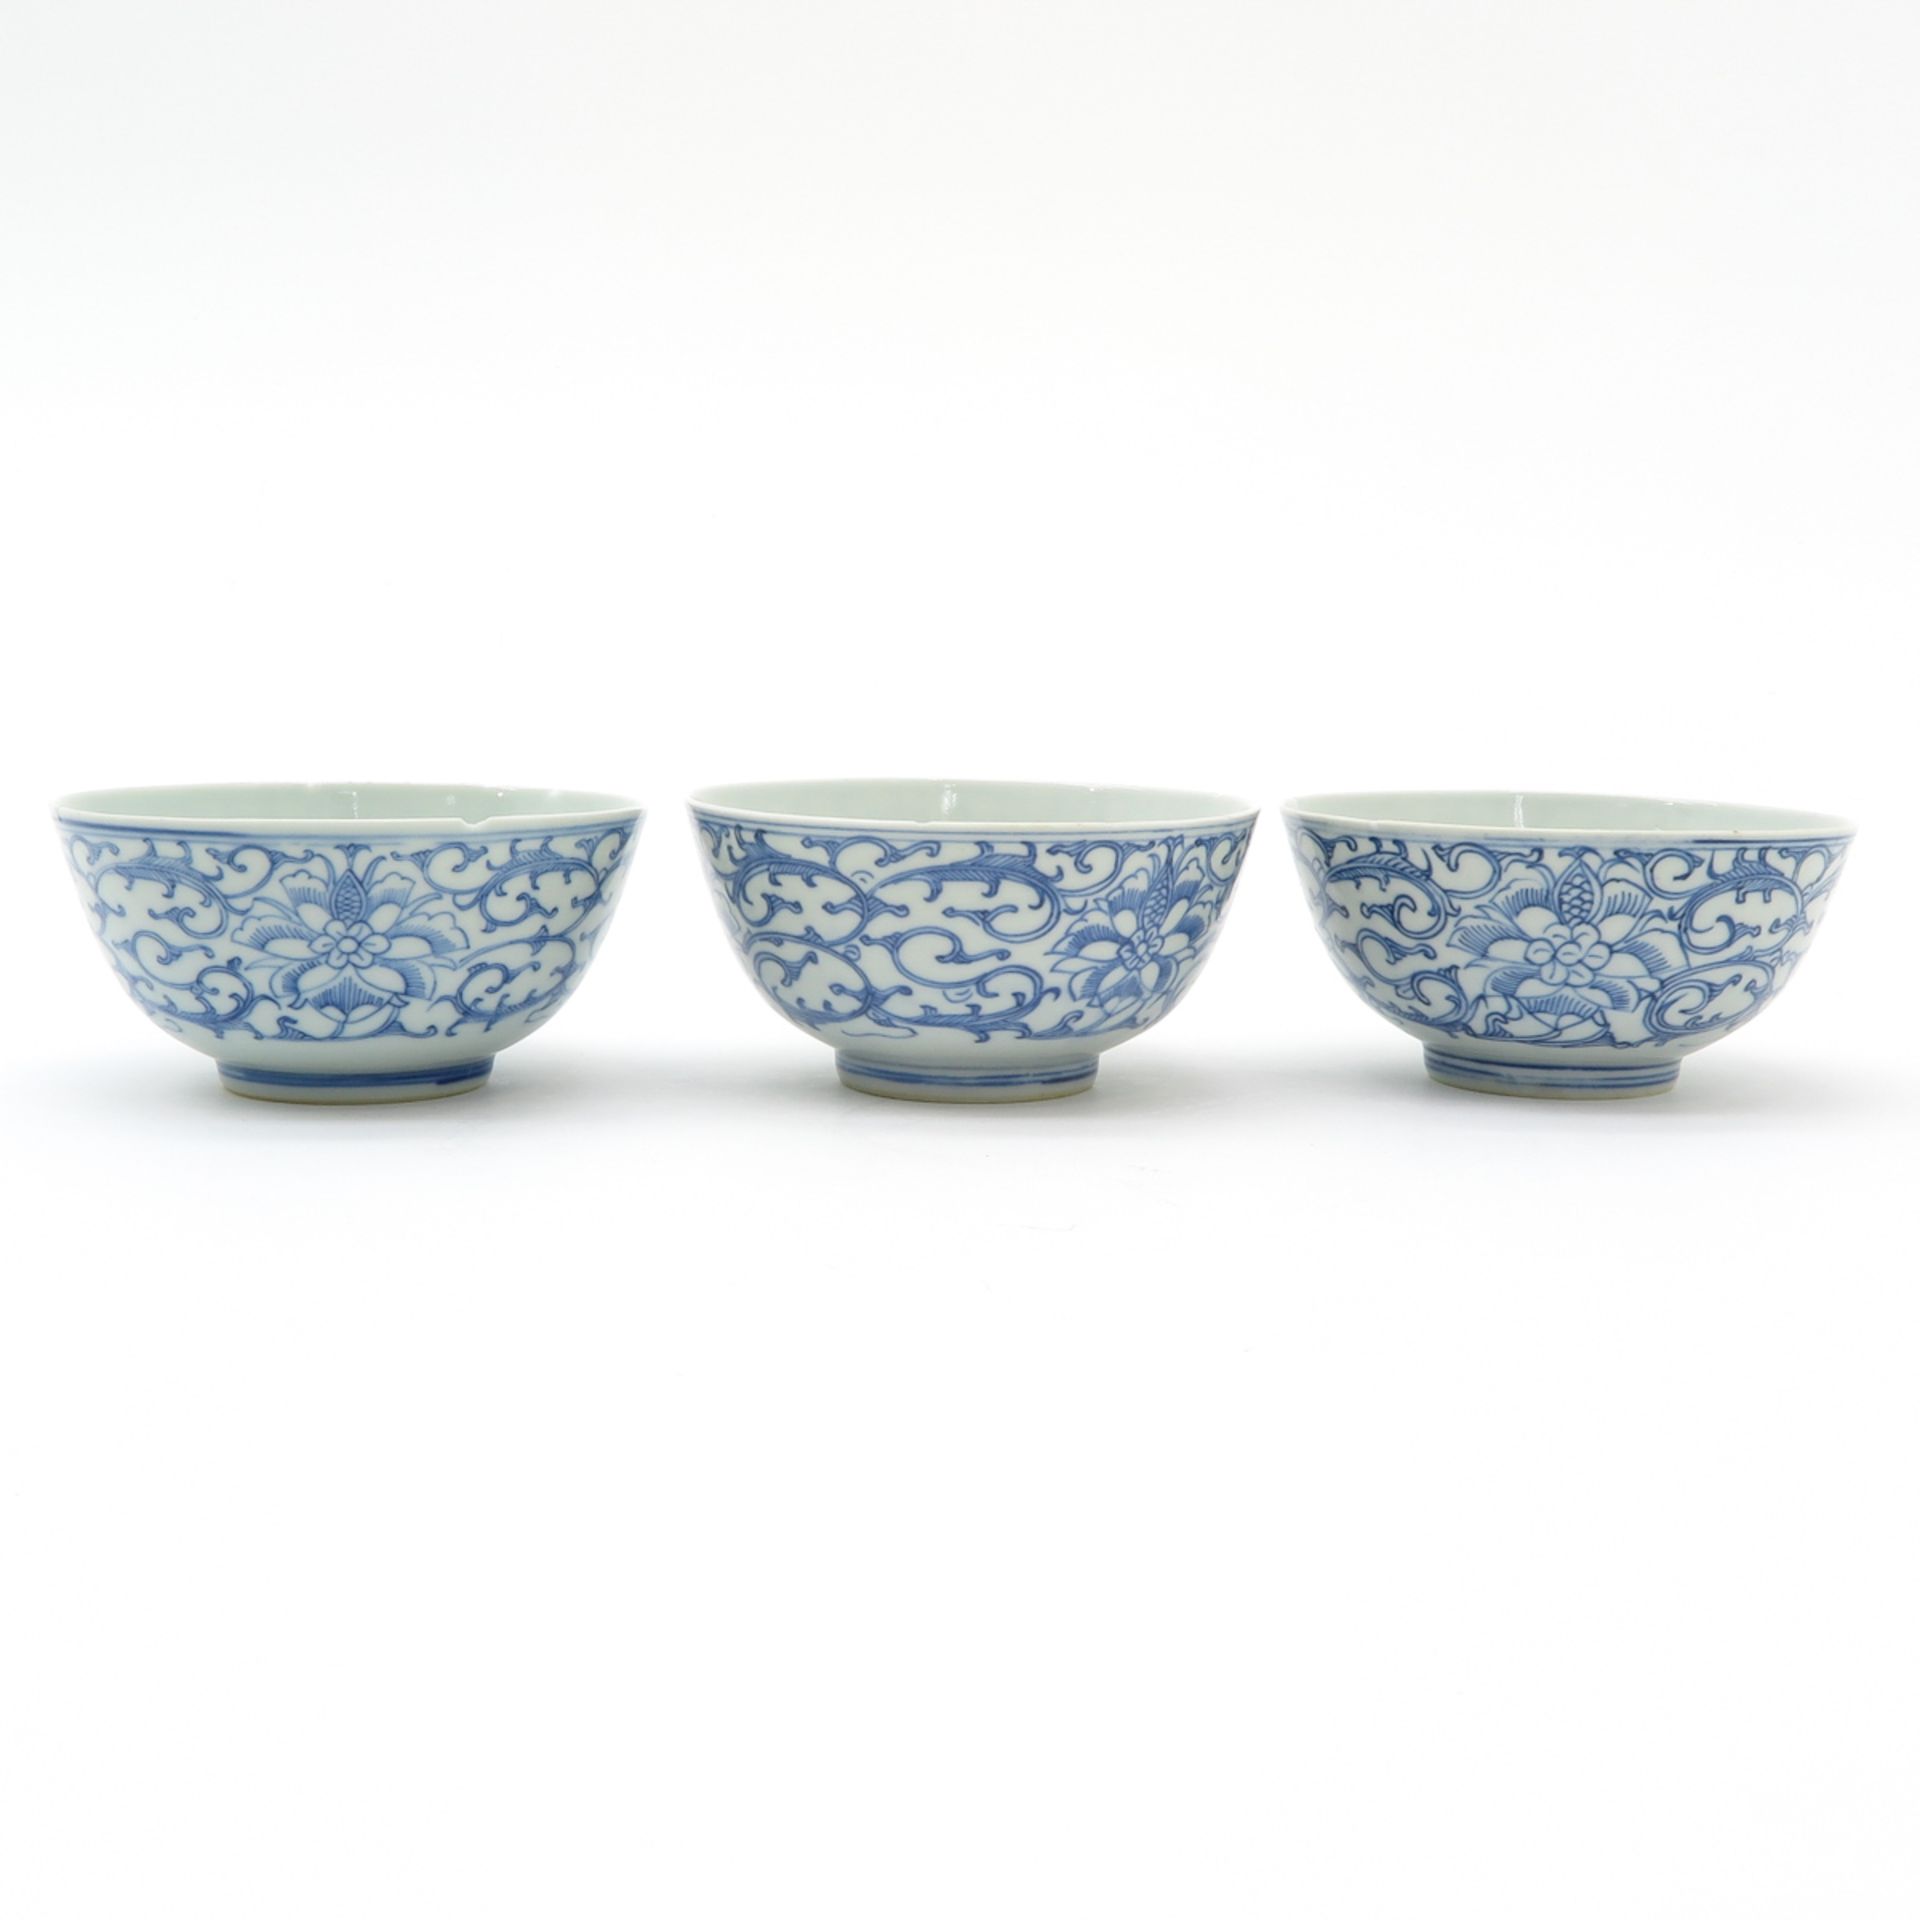 Lot of 3 Bowls - Image 3 of 6